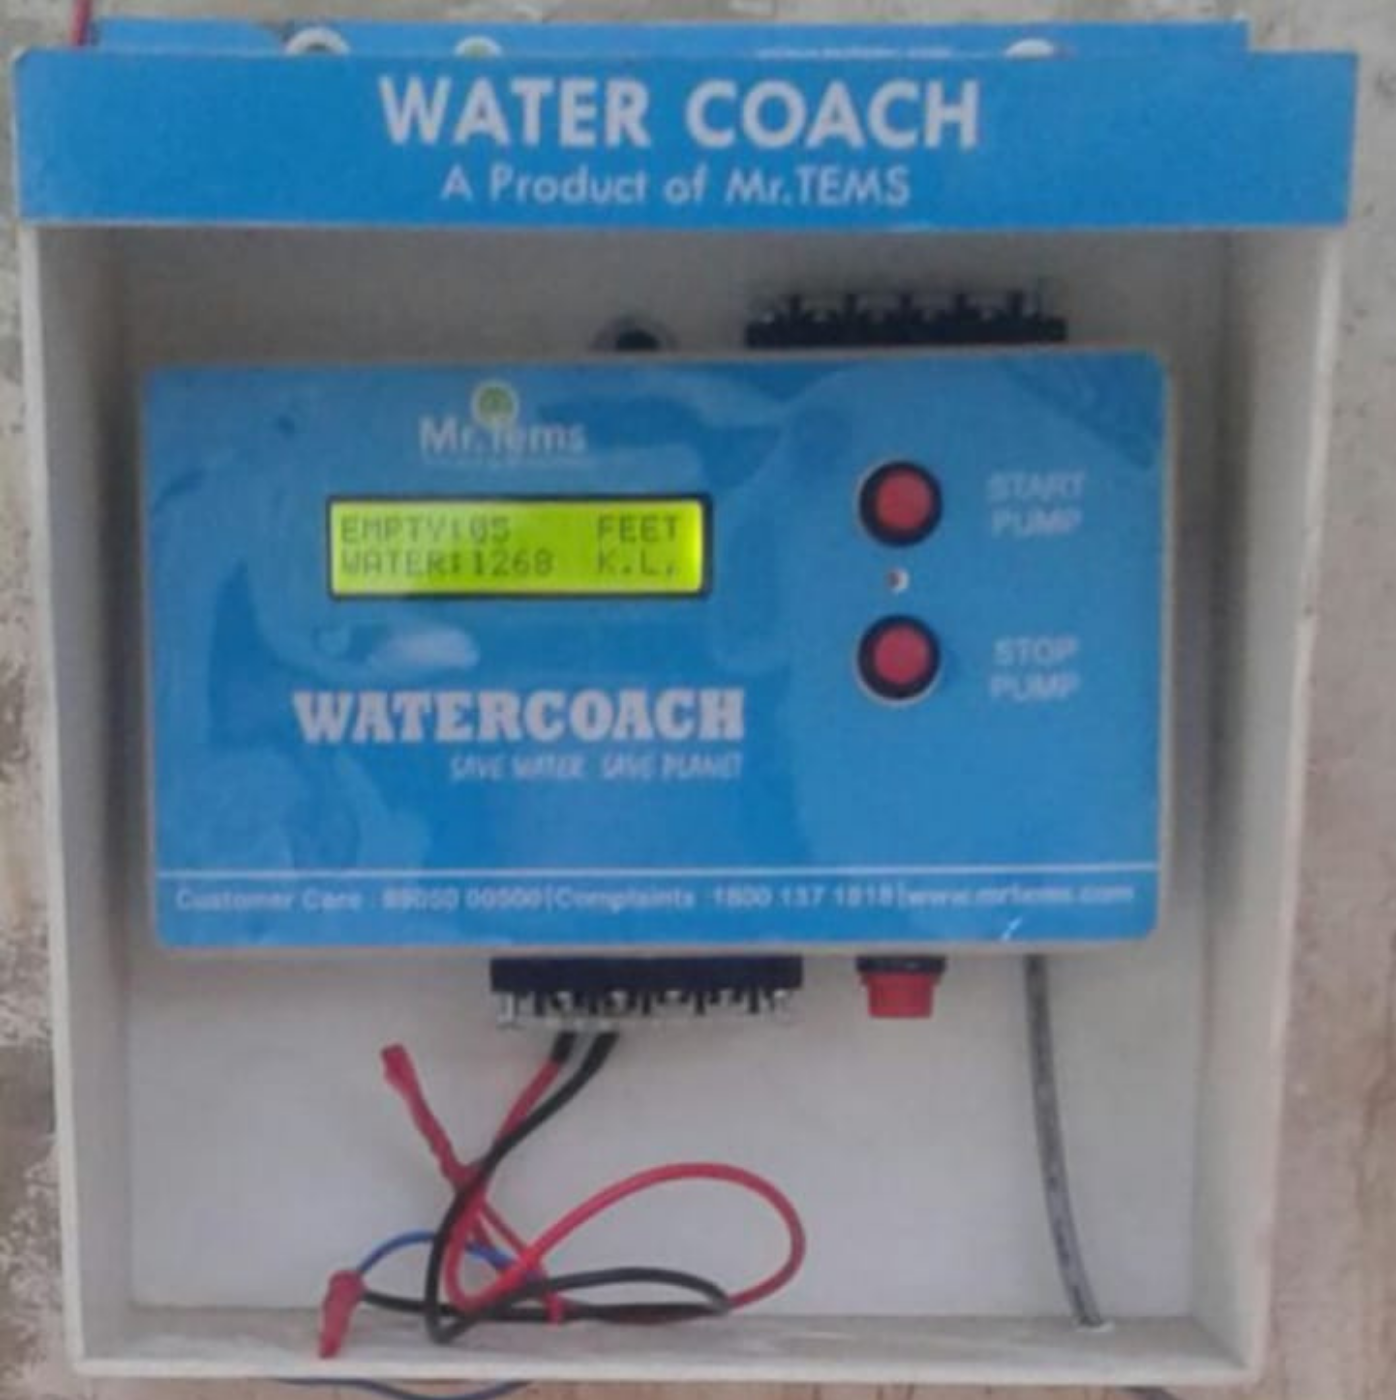 WATER COACH -A product Launched for commercial Units